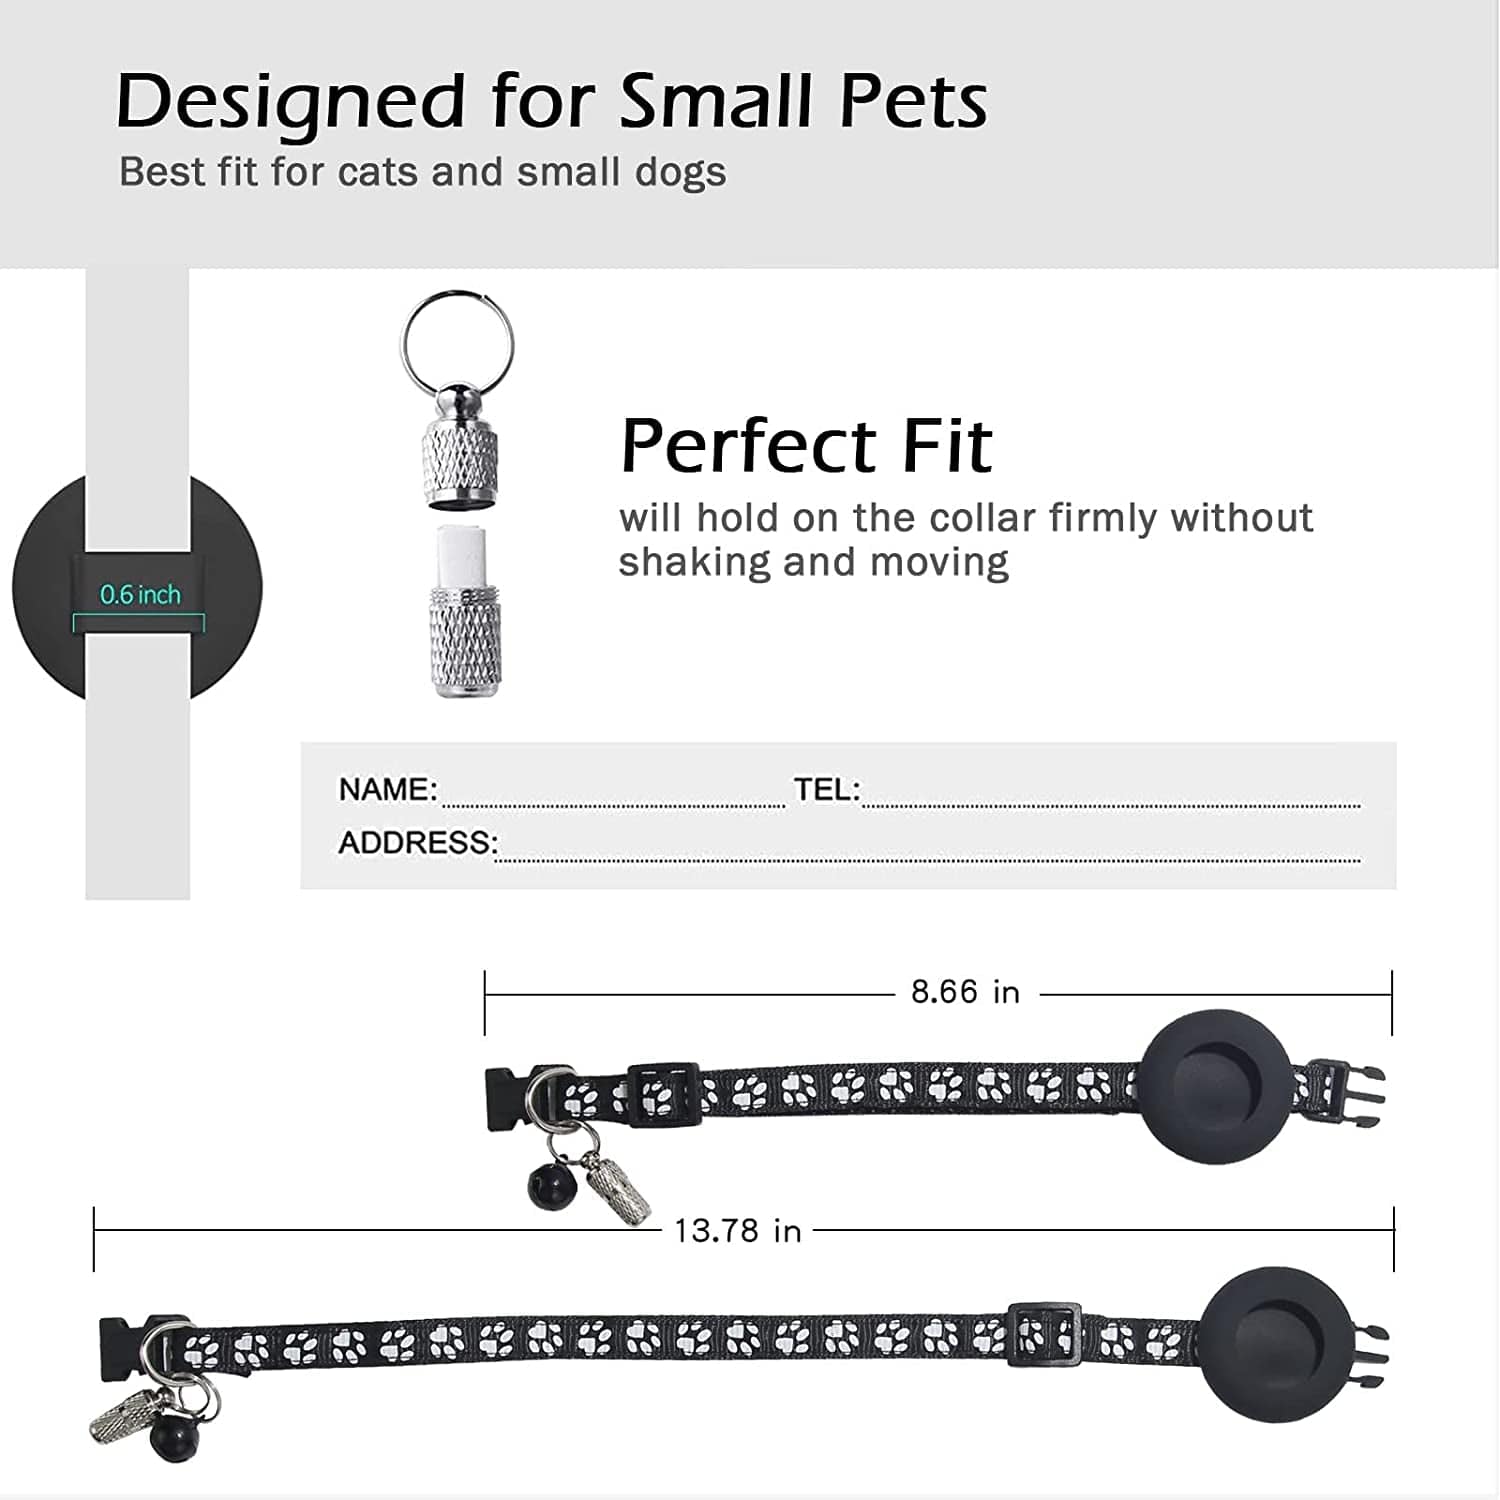 2 Pack Airtag Cat Collar, Breakaway Cat Collars Holder Compatible with Apple Airtag, Adjustable Reflective Strap with Bell & ID Tag for Cat Dog Kitten Puppy